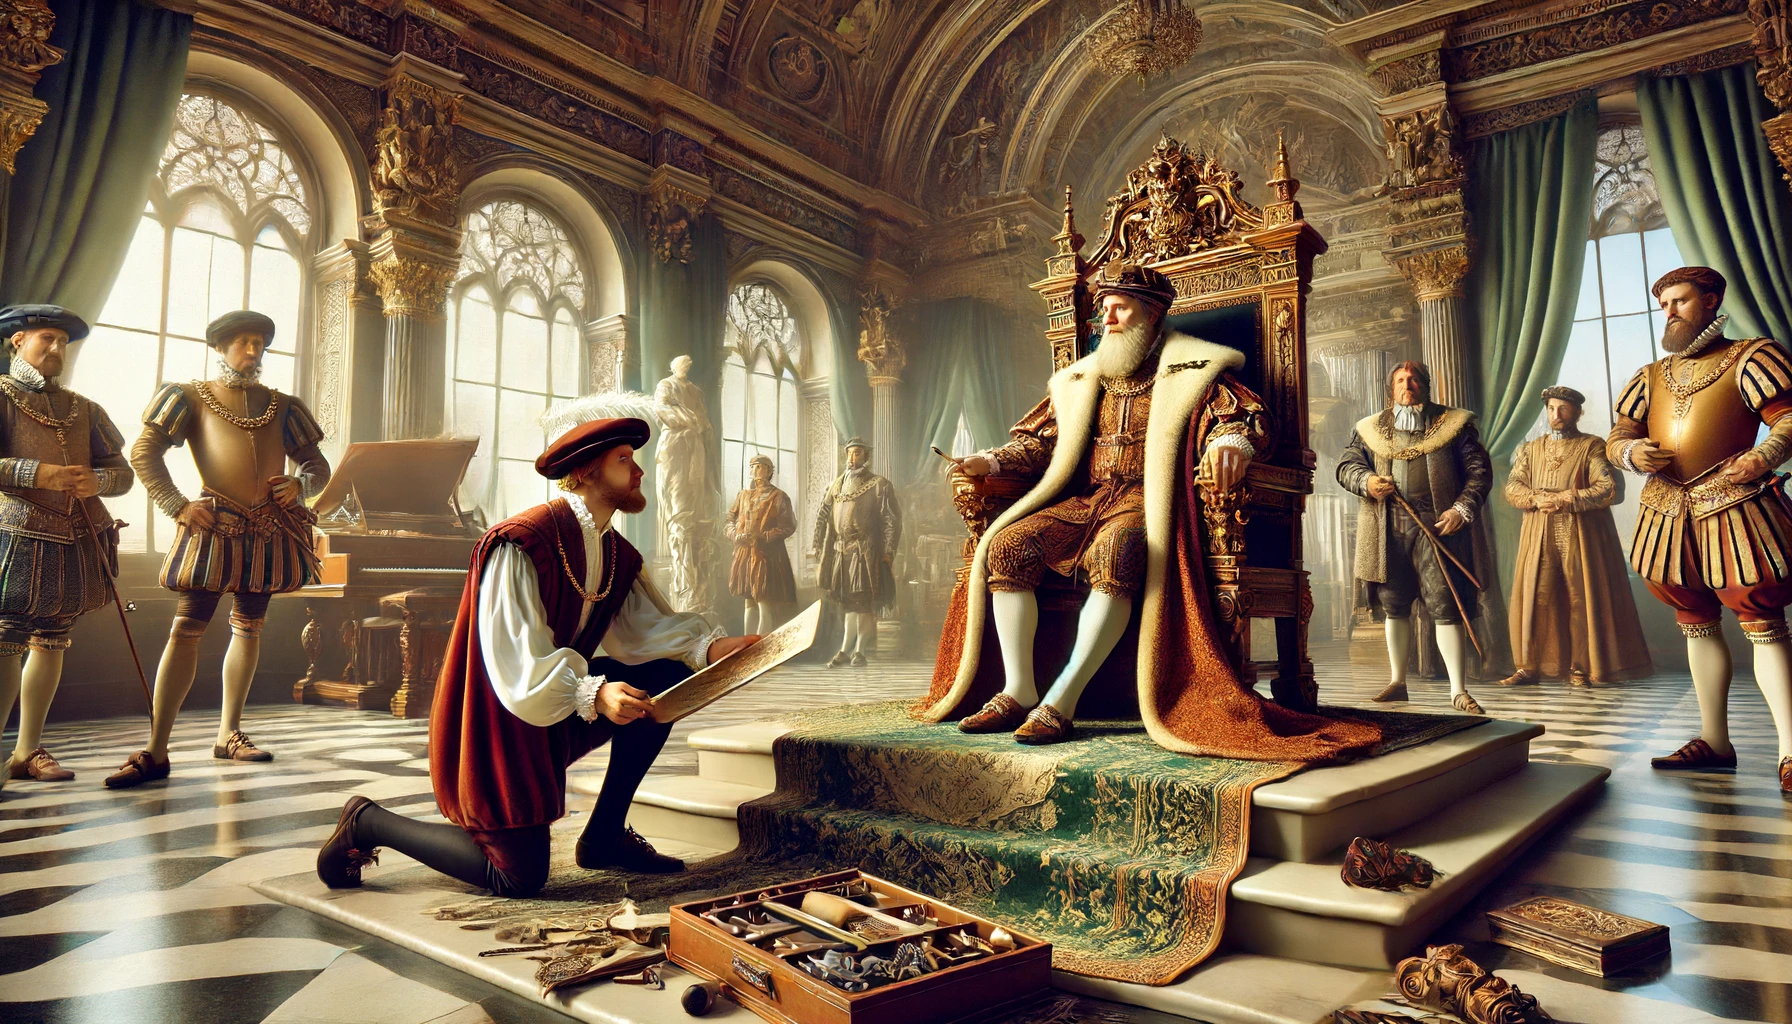 A skilled craftsman presenting his work to a king in a grand hall.